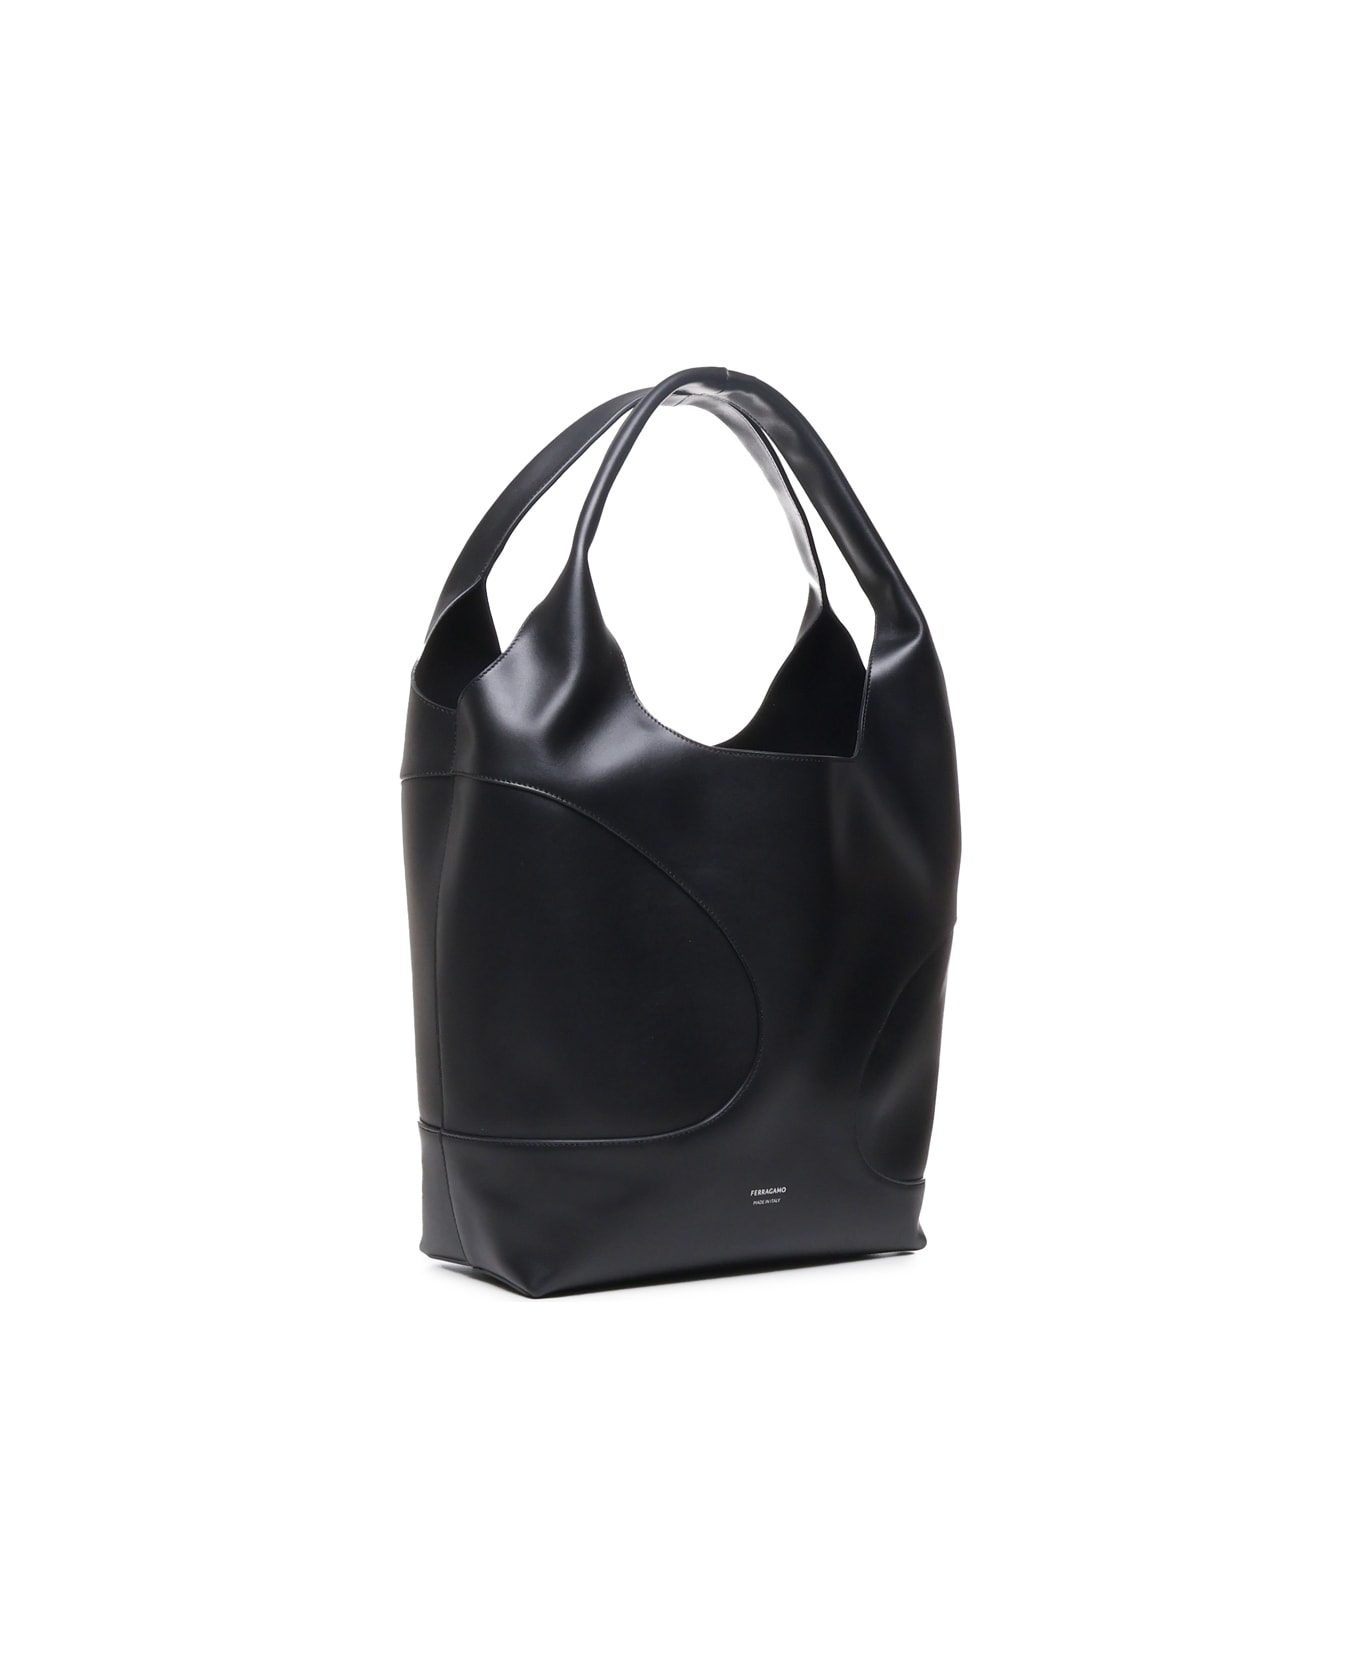 Ferragamo Tote Bag With Cut-out - Black トートバッグ